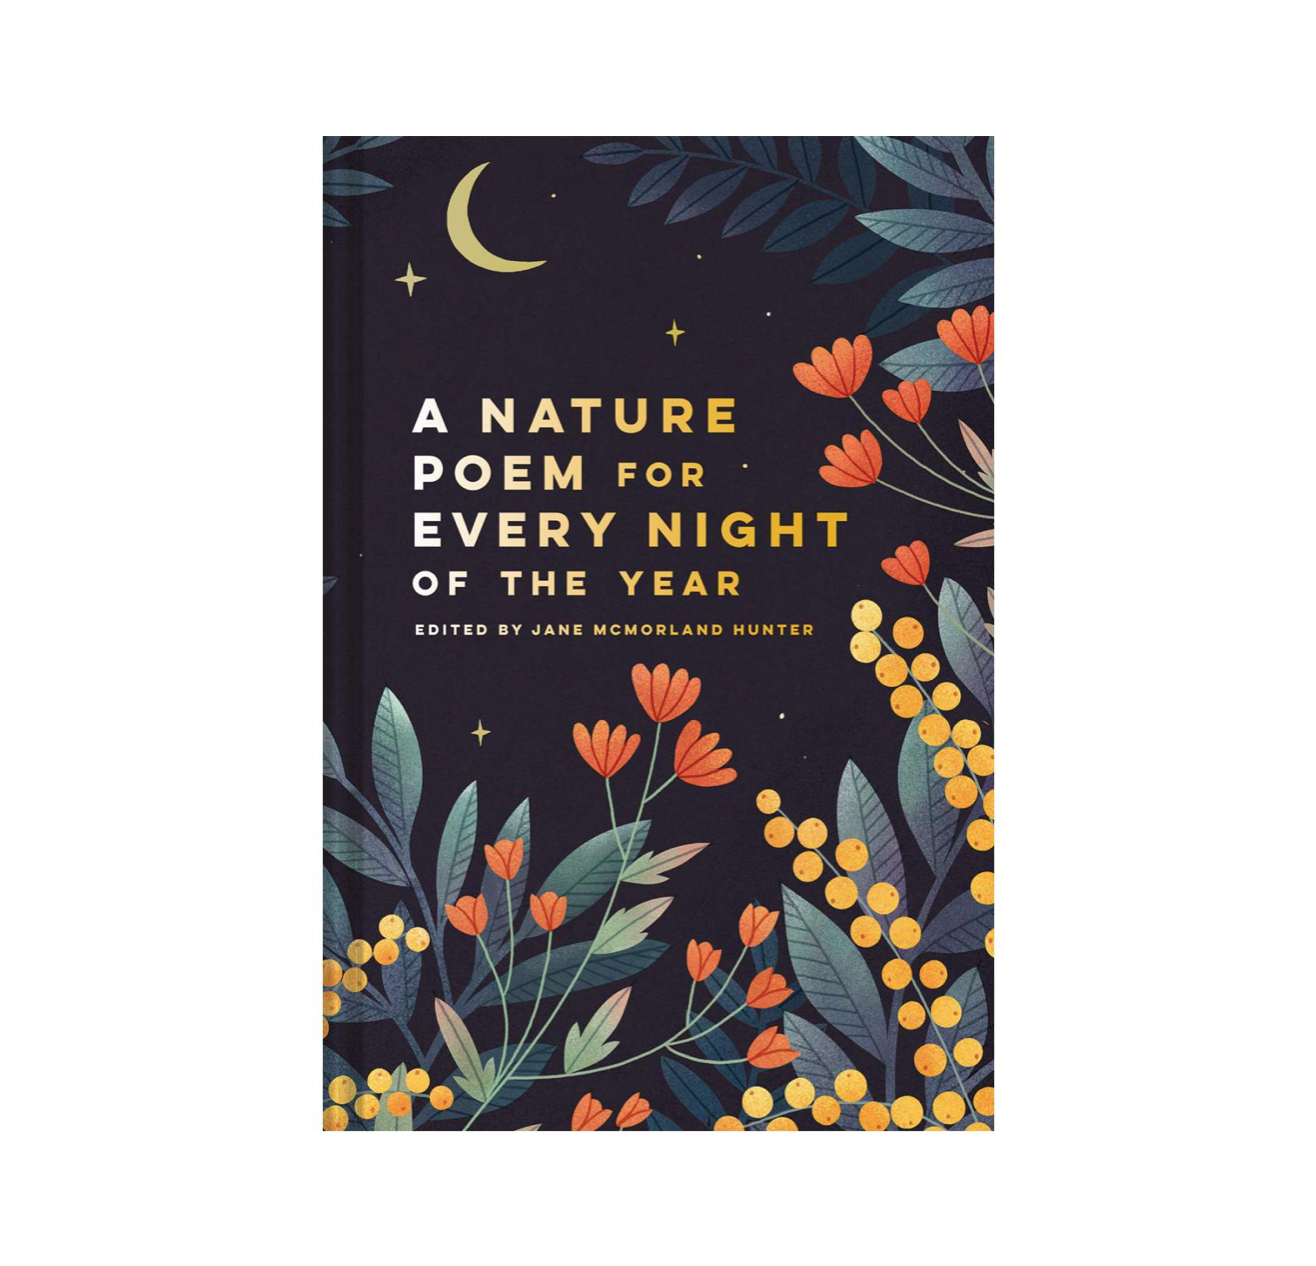 A nature poem for every night of the year